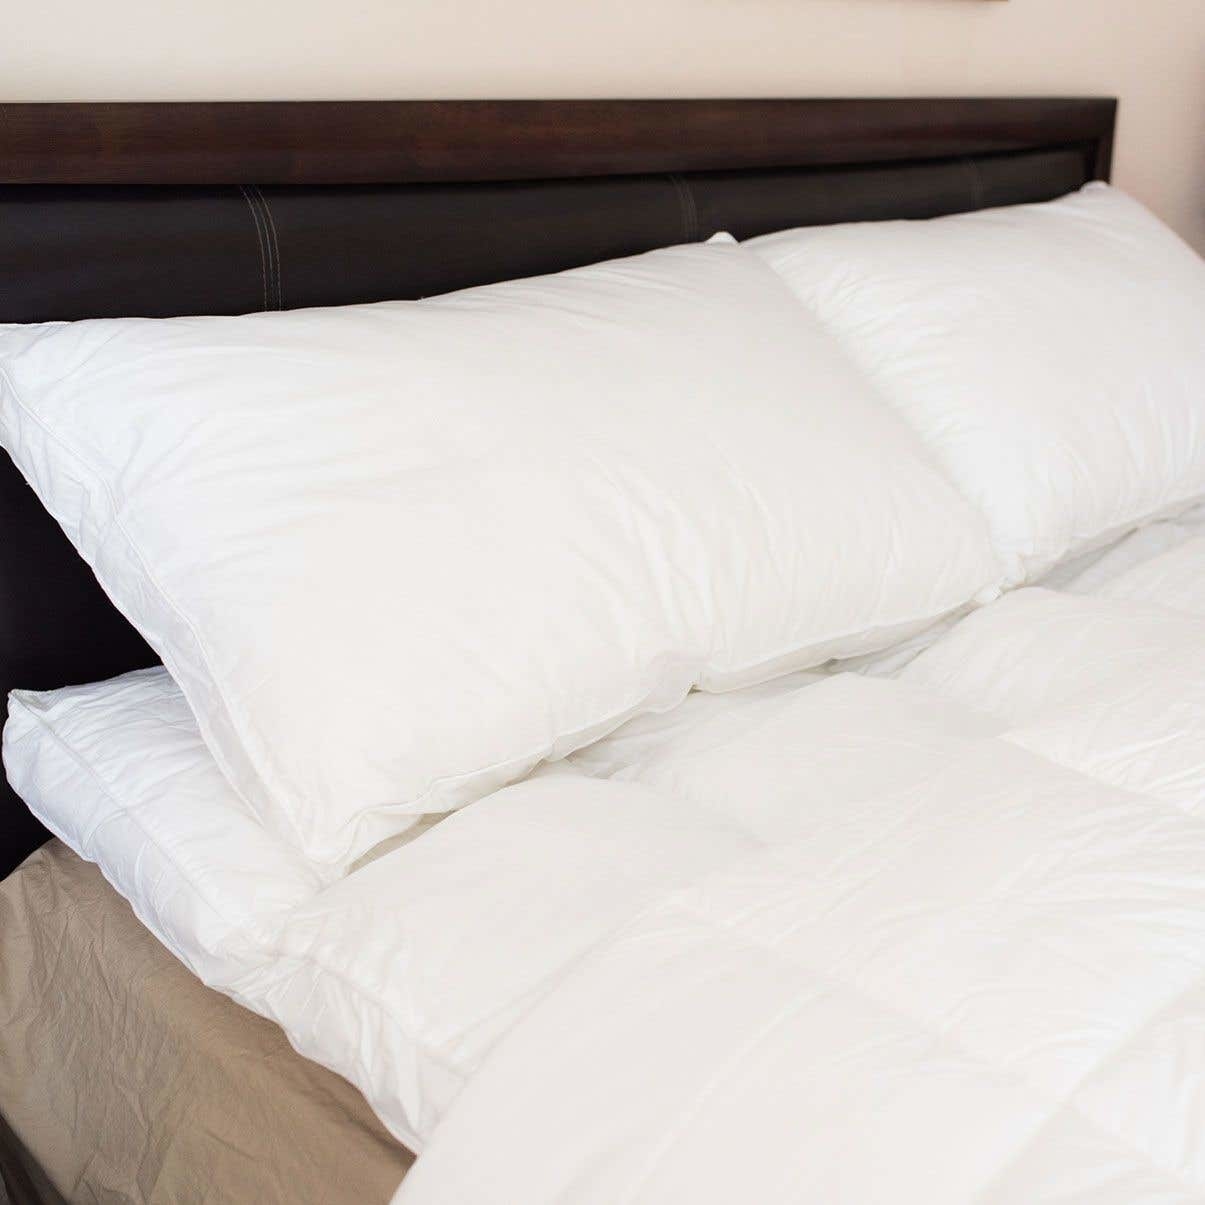 A fluffy mattress topper on a bed with pillows